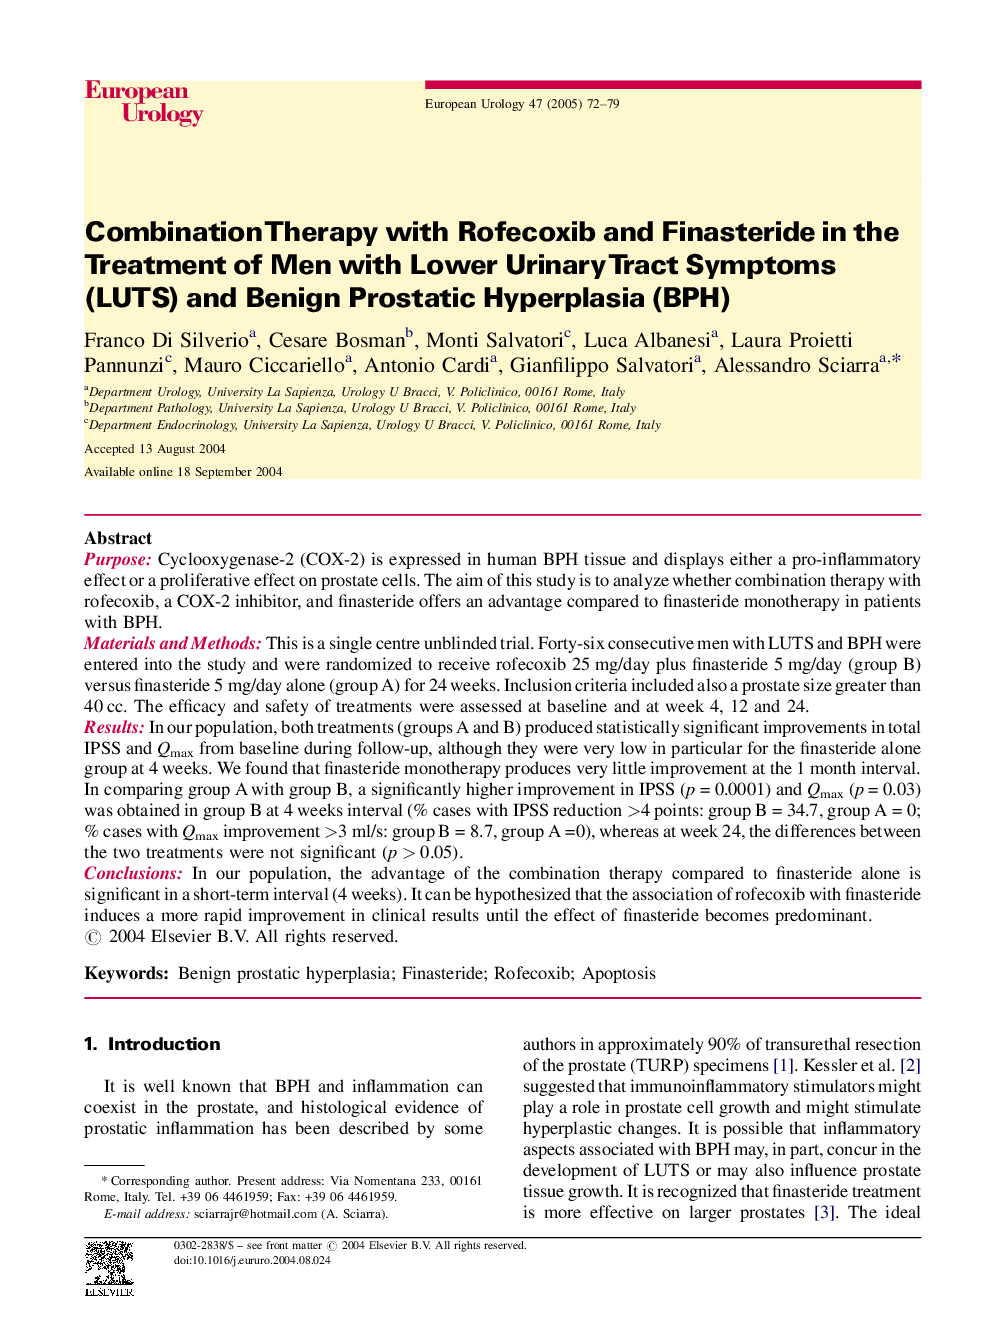 Combination Therapy with Rofecoxib and Finasteride in the Treatment of Men with Lower Urinary Tract Symptoms (LUTS) and Benign Prostatic Hyperplasia (BPH)